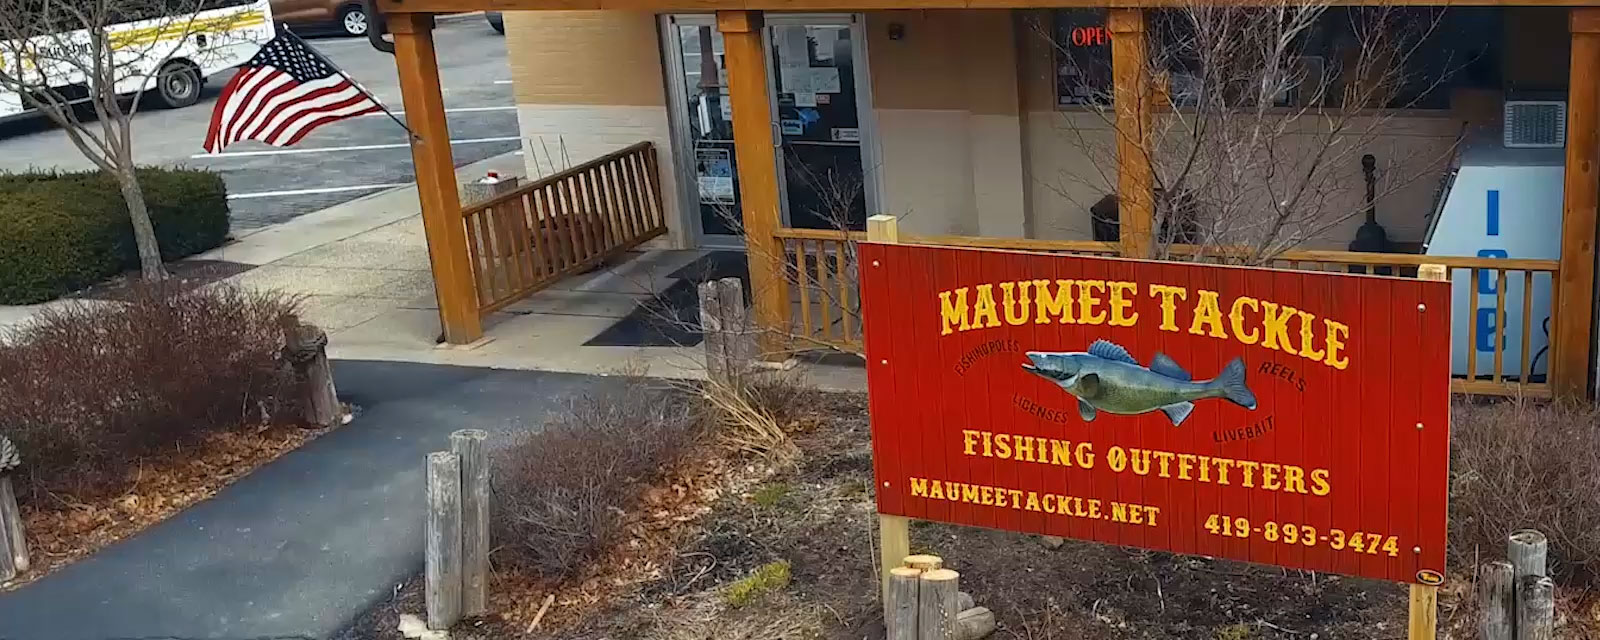 Maumee Tackle Fishing Outfitters